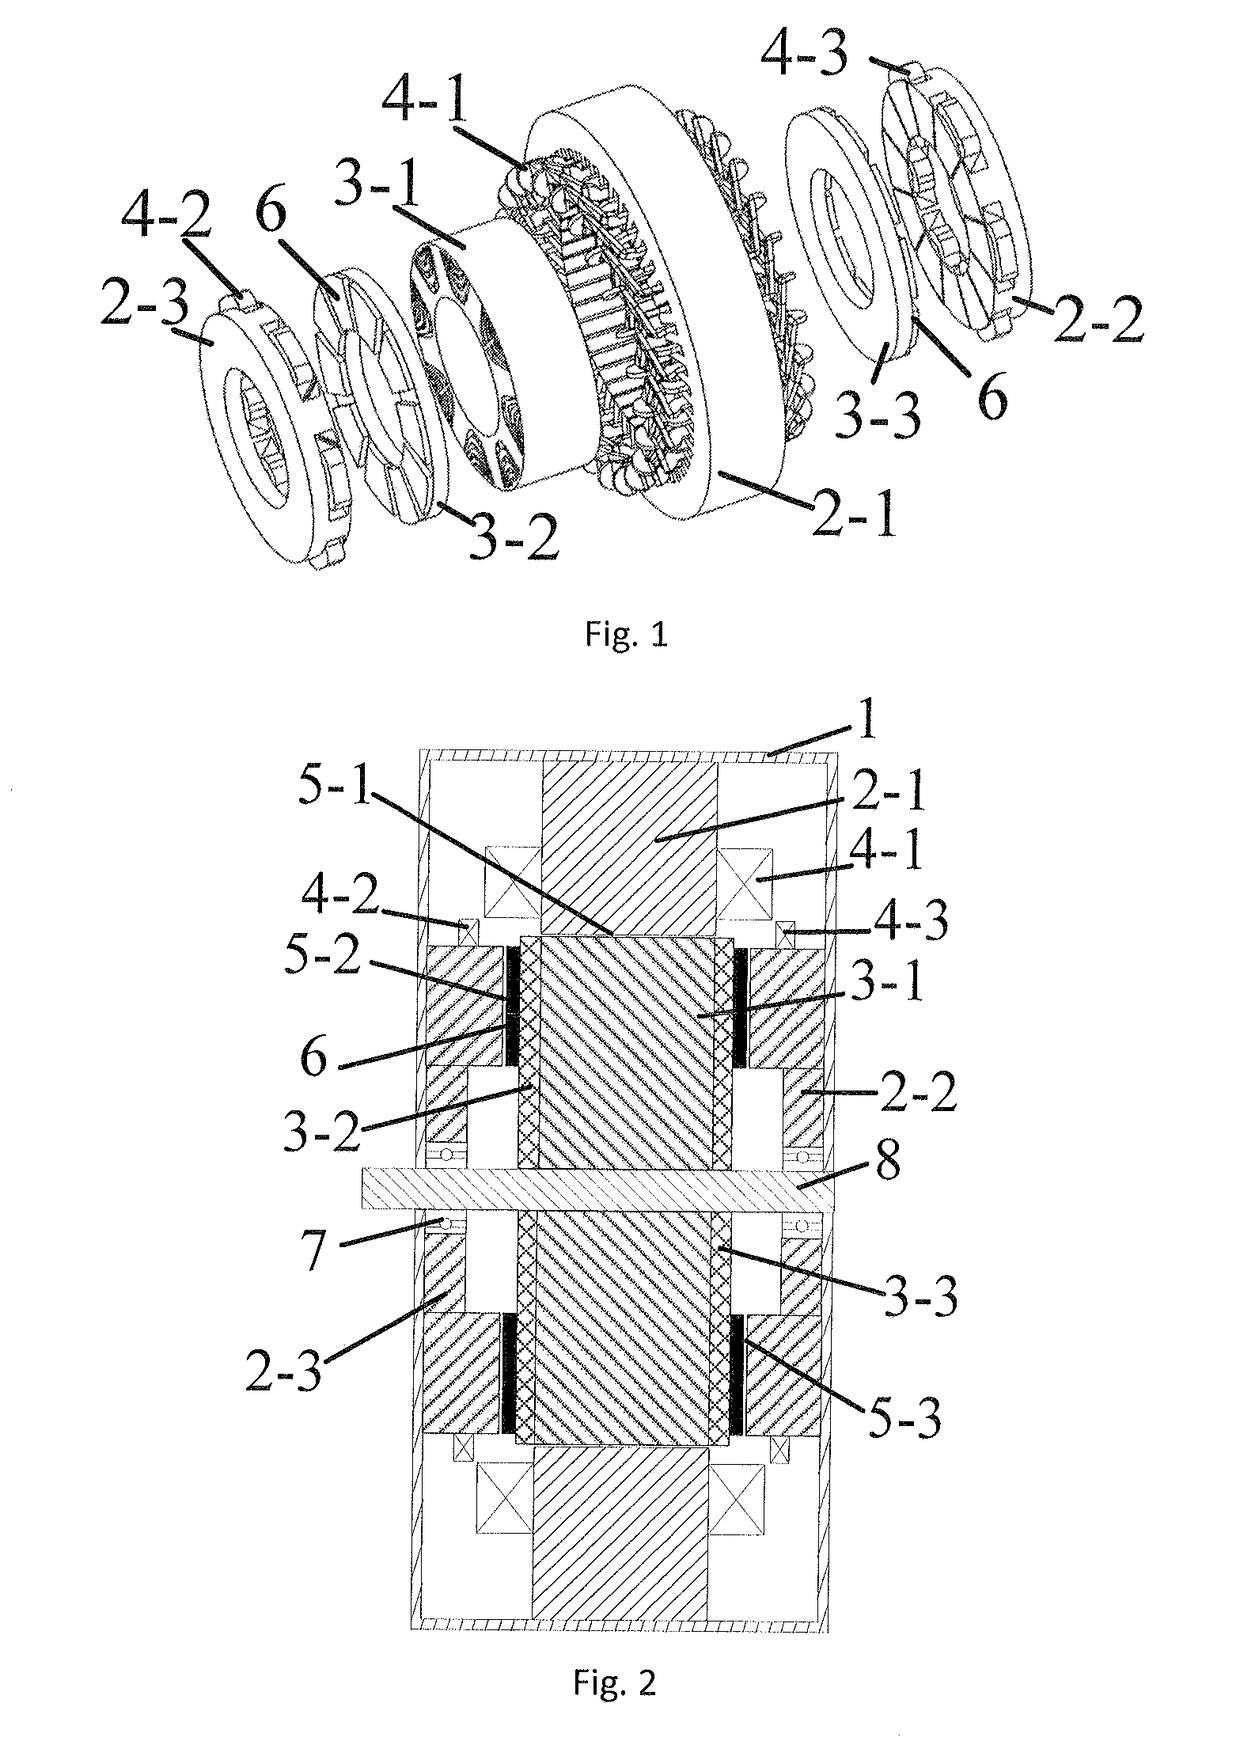 Motor with separated permanent magnet torque and reluctance torque and its optimal efficiency control